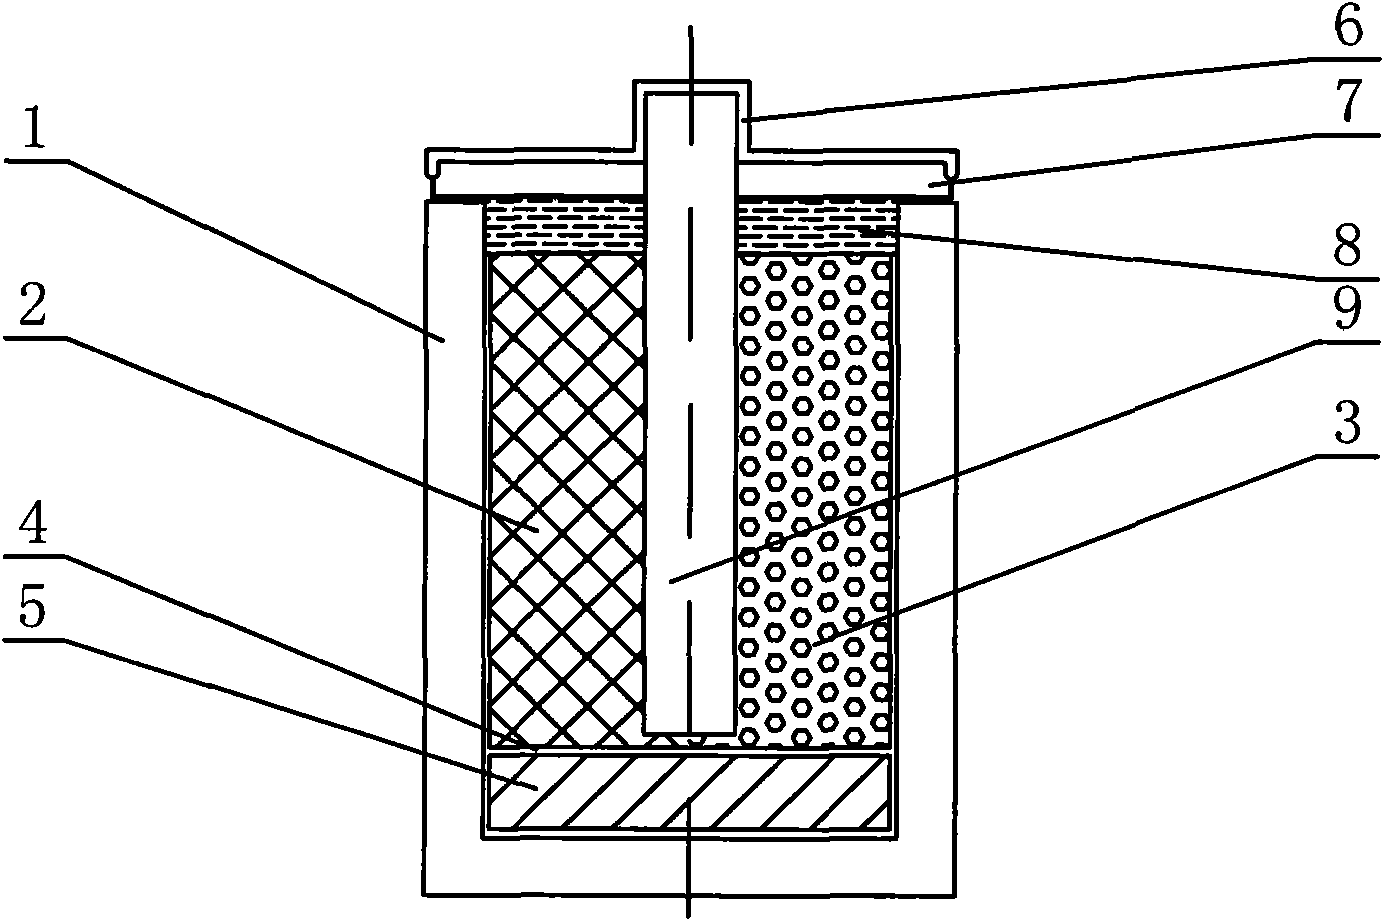 Detachable dry cell structure